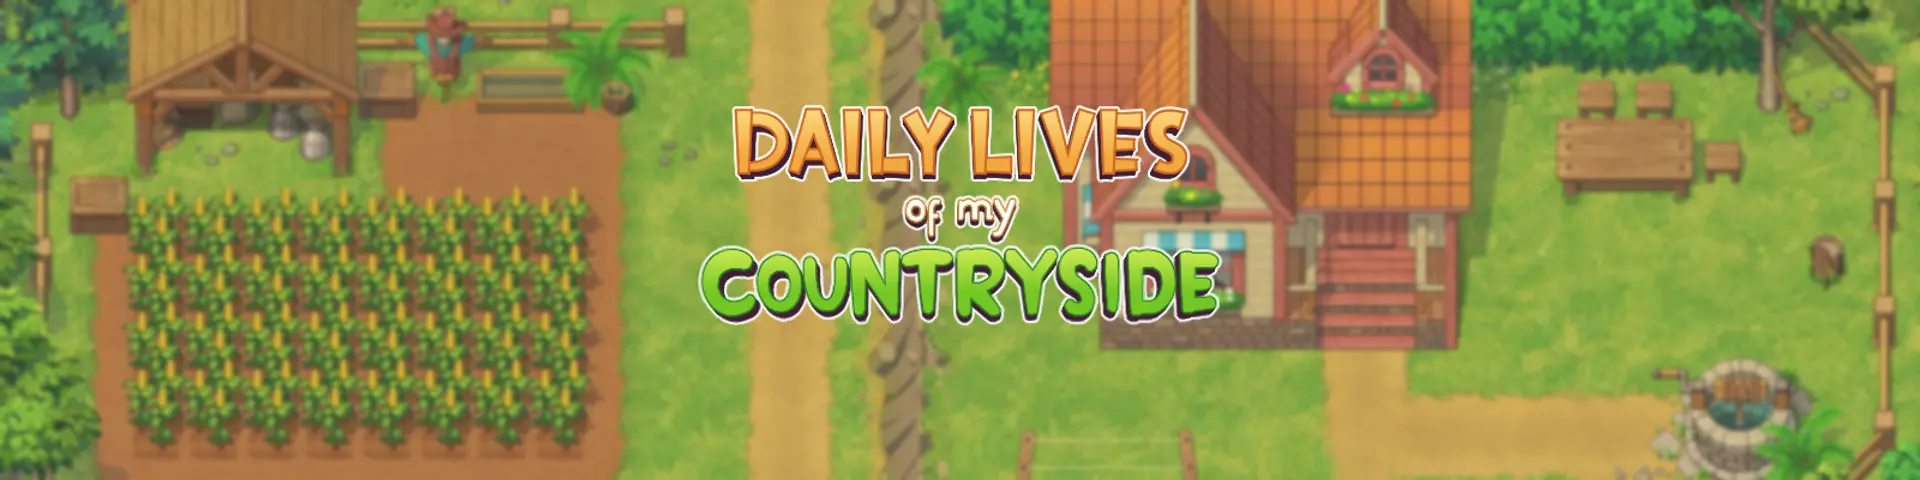 Daily Lives of my Countryside [v0.1.3.2] main image